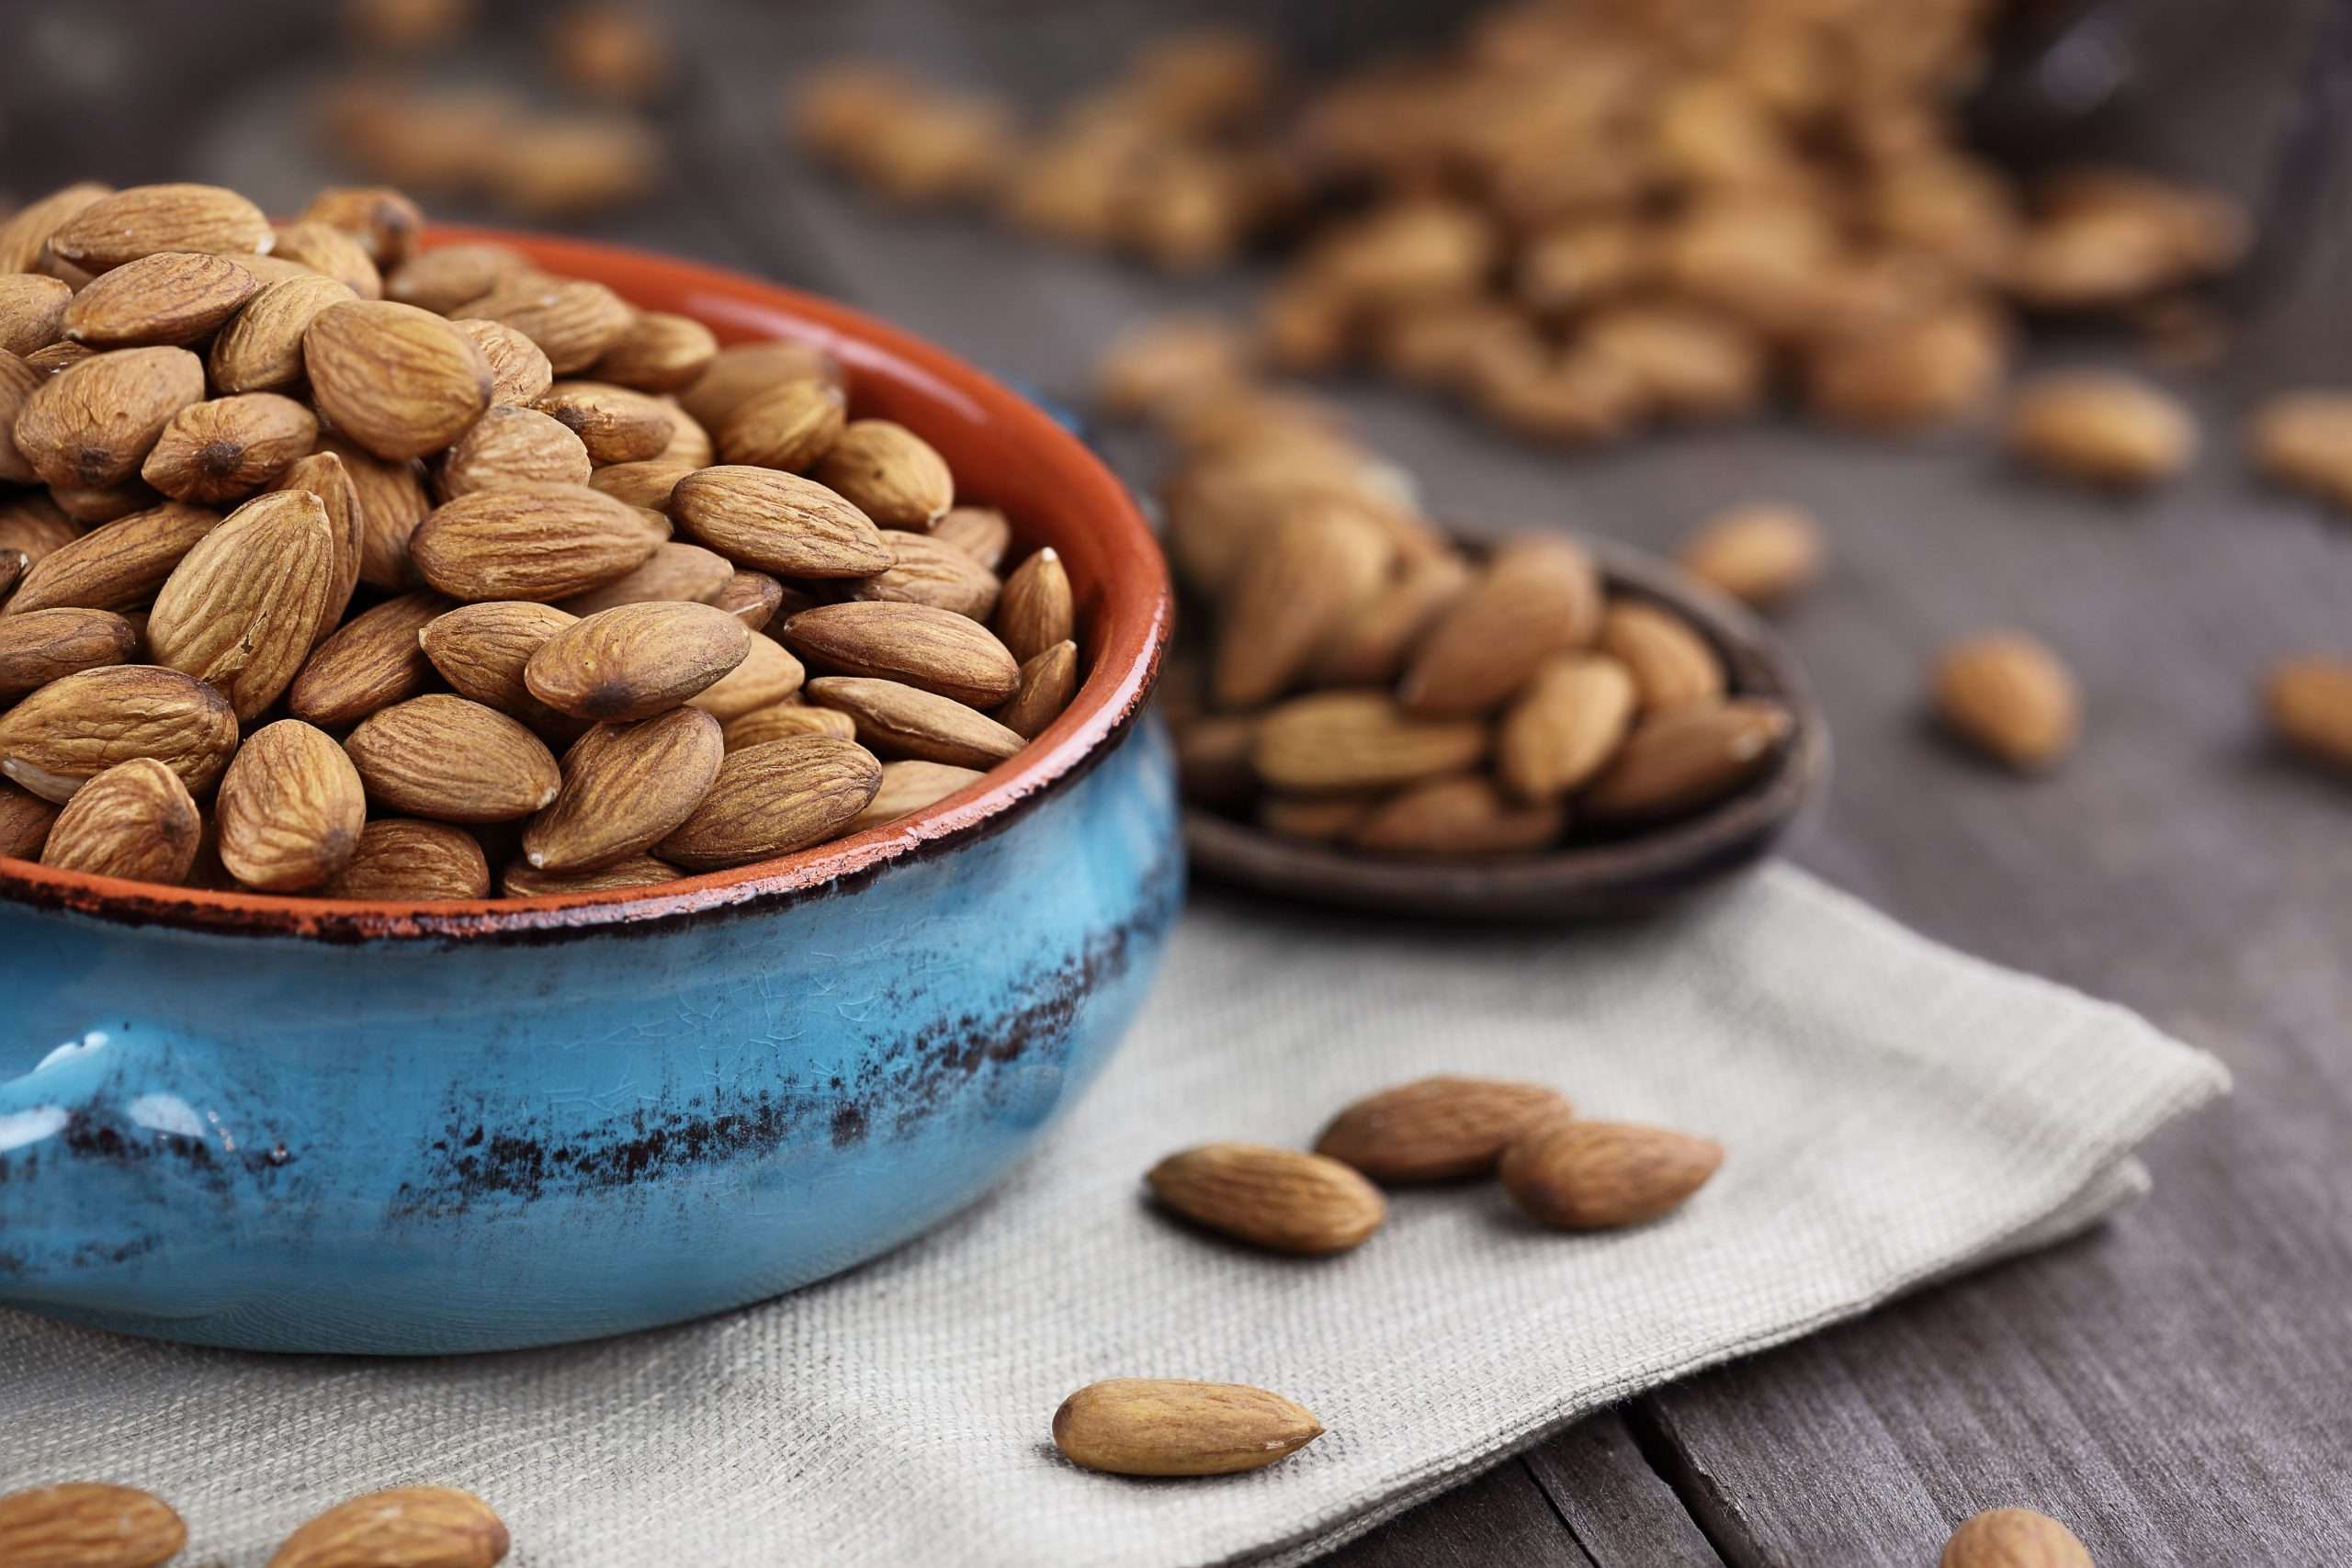 Why are Almonds so Good for You?